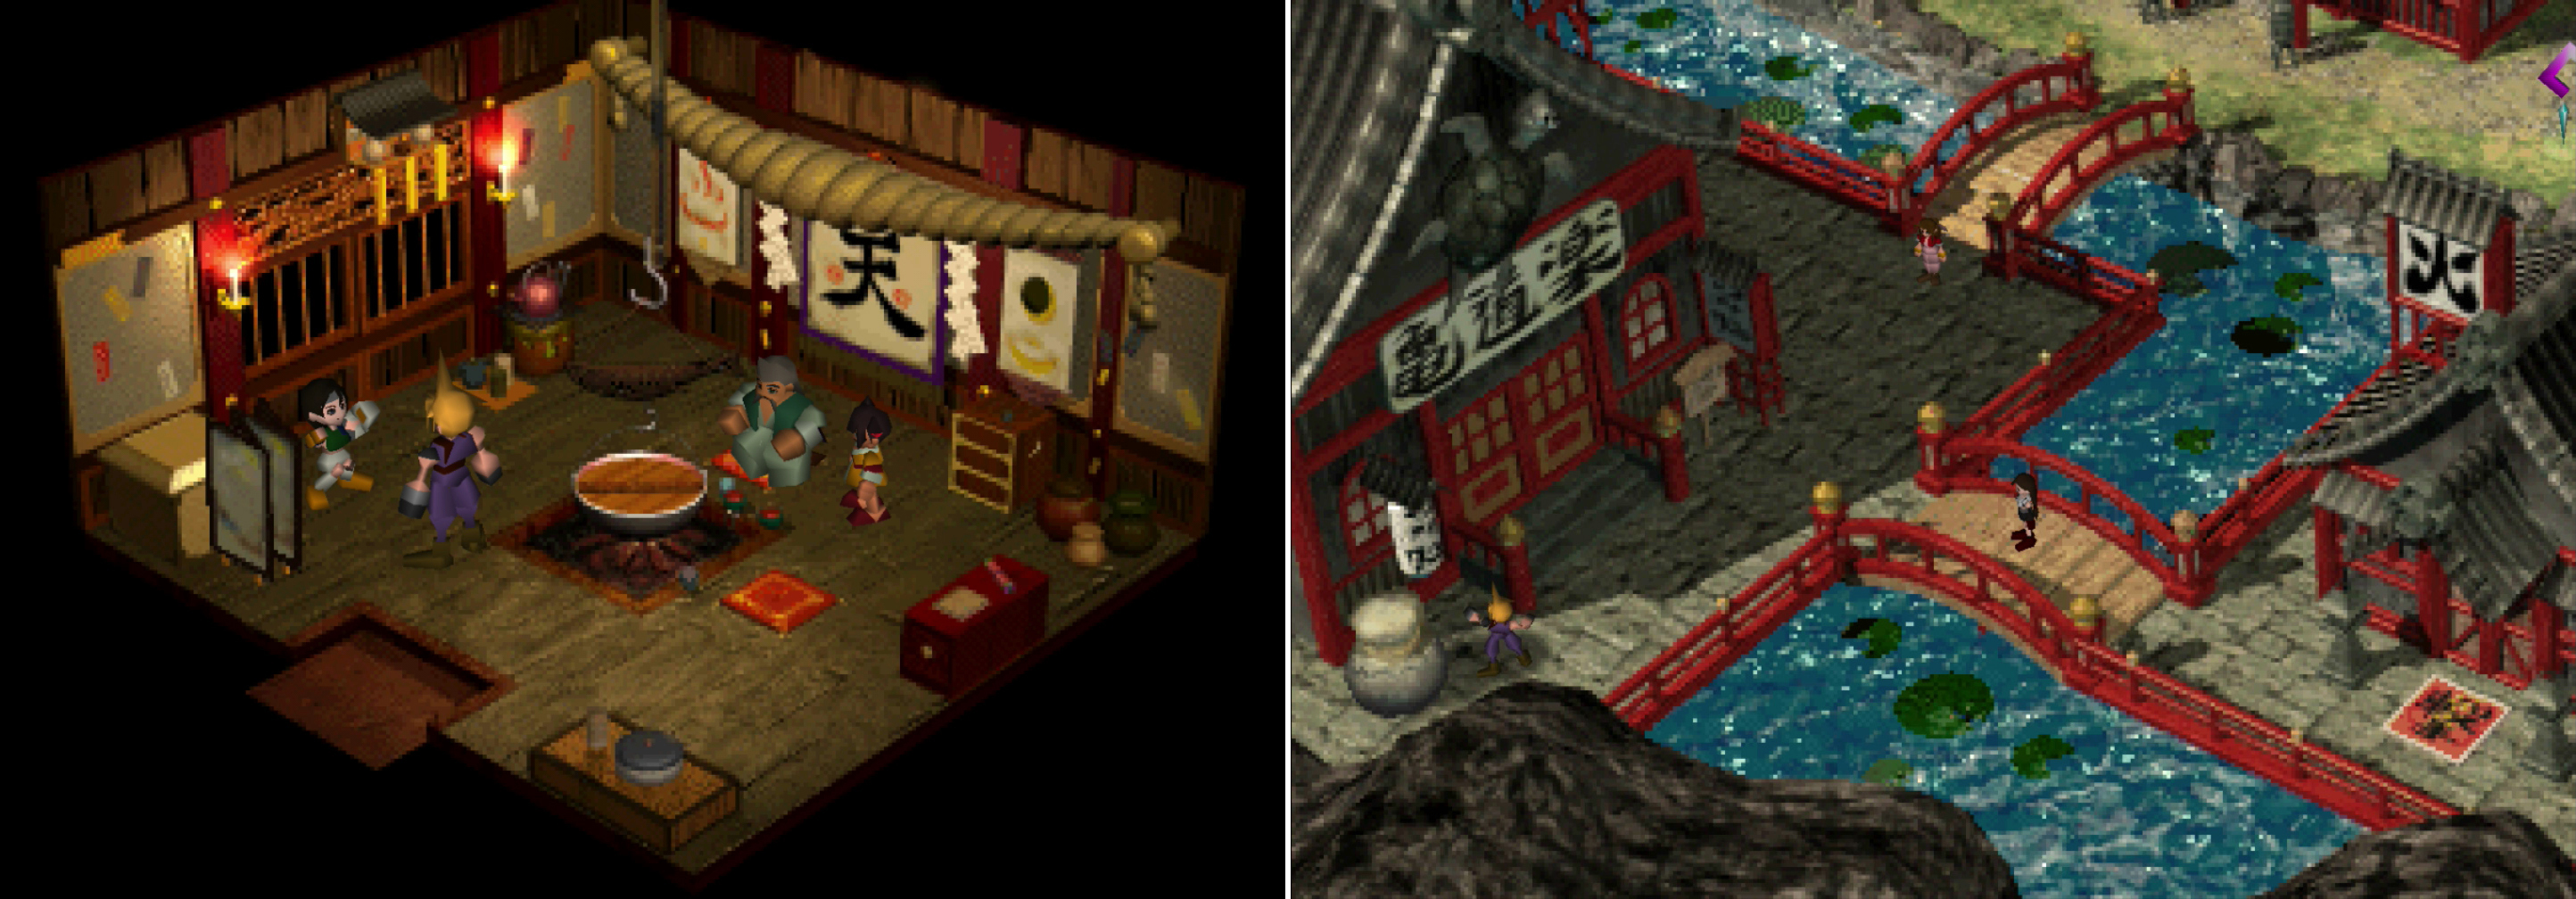 Find Yuffie lurking behind a screen (left), then set up an ambush for her as she hides in an urn near the Turtles Paradise (right).